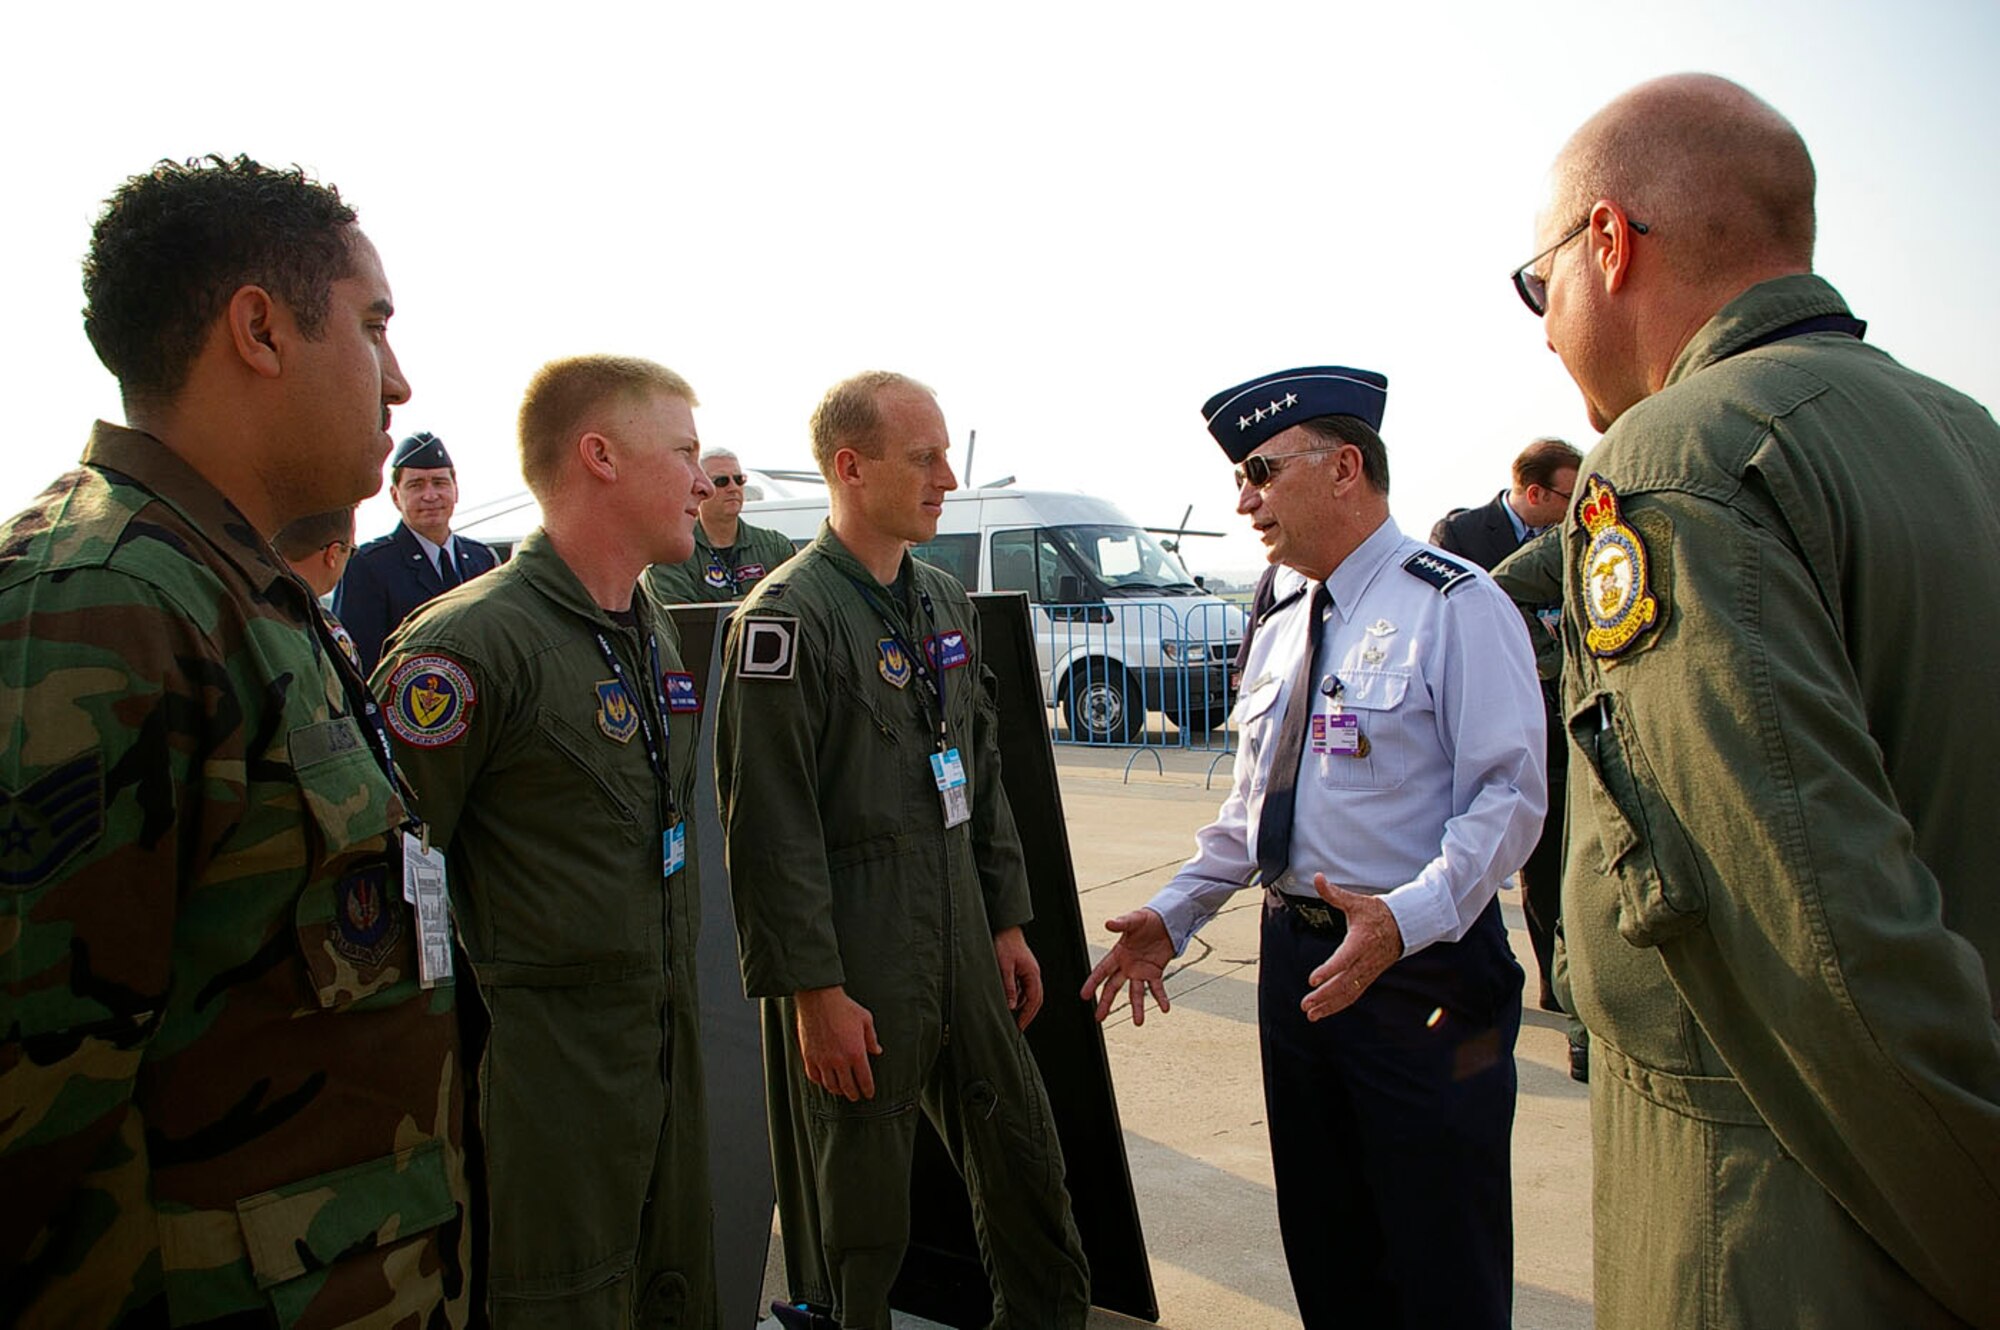 RAMENSKOYE AIRFIELD, Zhukovsky, Russia -- Gen. Tom Hobbins, U.S. Air Forces in Europe commander, takes a moment to chat with Staff Sgt. Kevin Jones, Senior Airman Travis Swinson, Capt. Scott Montier and Senior Master Sgt. Todd Cole from the 100th Air Refueling Wing, Royal Air Force Mildenhall, England, Aug. 21 during the first day of the Moscow International Air Show. U.S. Air Force aircraft from Europe and the states are part of the static display and flying demonstration at the air show near Moscow. General Hobbins visited the air show and met with some of his troops from USAFE. While here, he also met with Russian President Vladimir Putin and chief of staff of the Russian Federation air force, Gen.-Col. Alexsandr Zelin. The air show is one of the premier events of its type in the world. U.S. participation in the air show demonstrates our commitment to international security, promotes international cooperation and contributes to U.S. foreign policy objectives. About 65 airmen from bases in Europe and the states are participating in this year’s air show. U.S. Air Force photo by Karen Abeyasekere